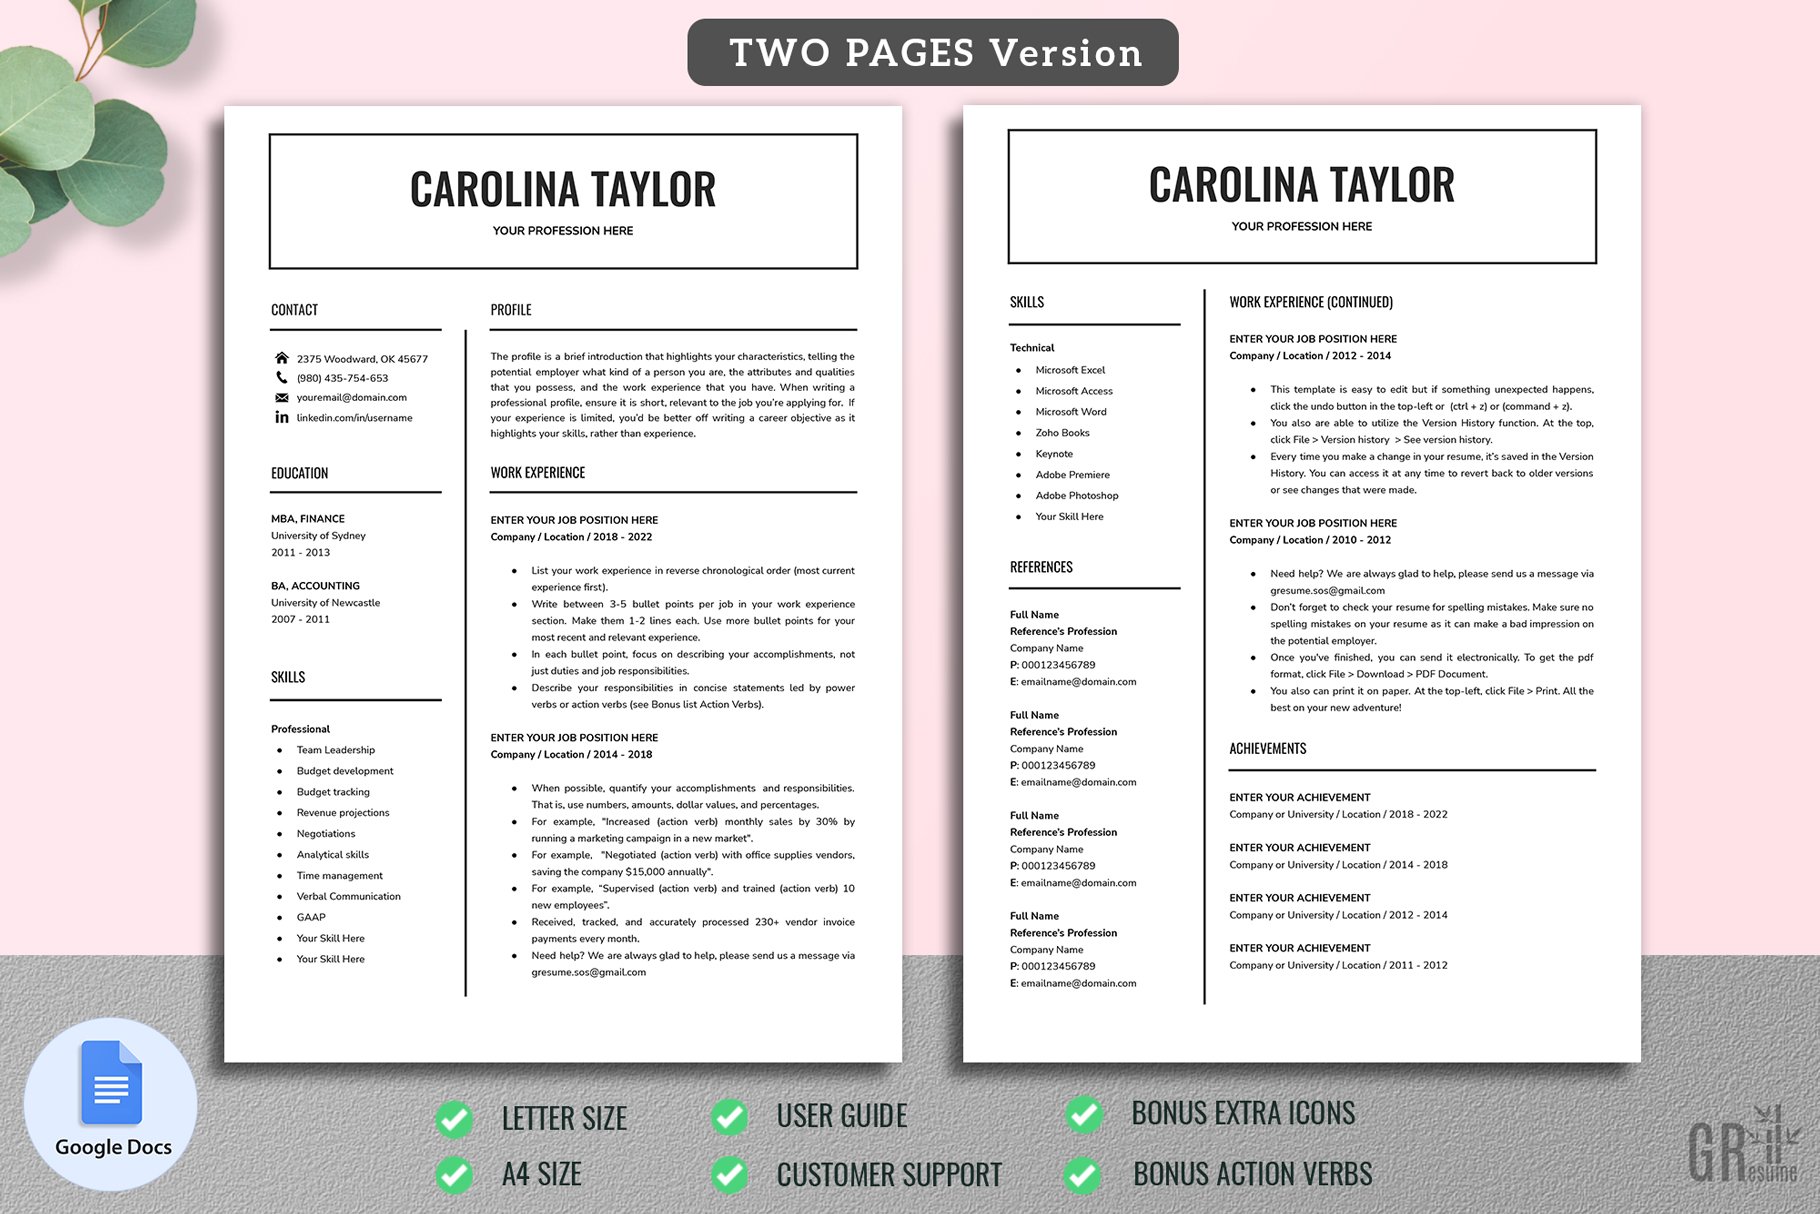 Two pages of a resume template for two people.